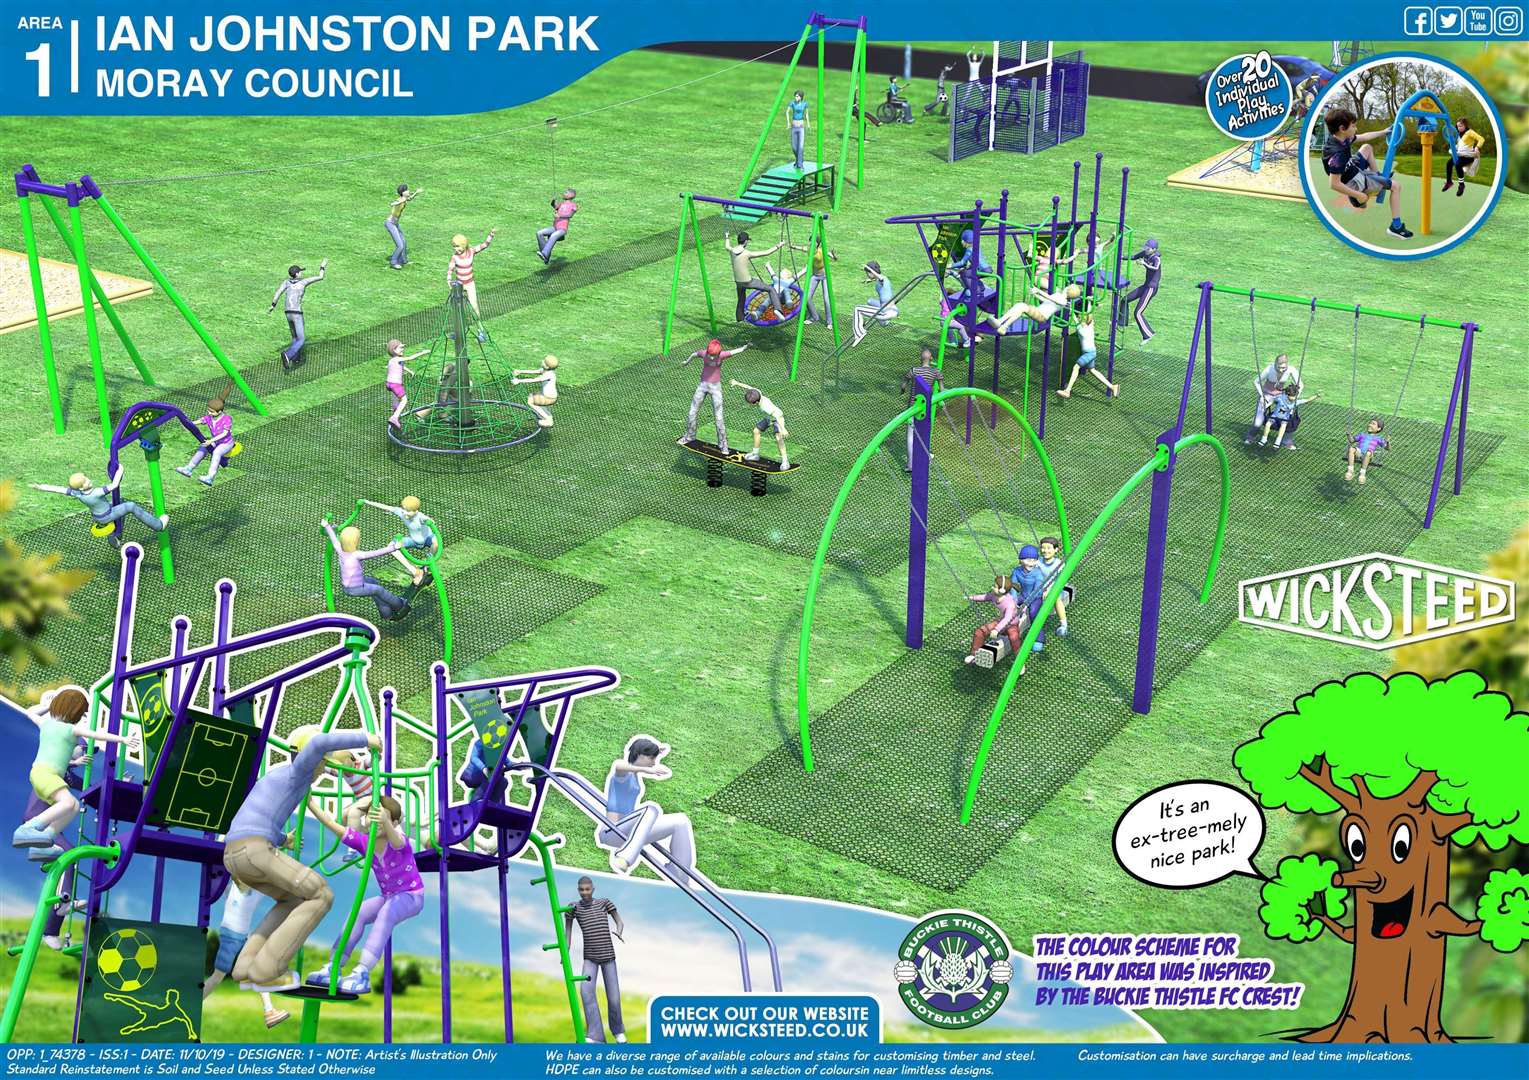 The winning design for Ian Johnston Park playpark by Wicksteed.